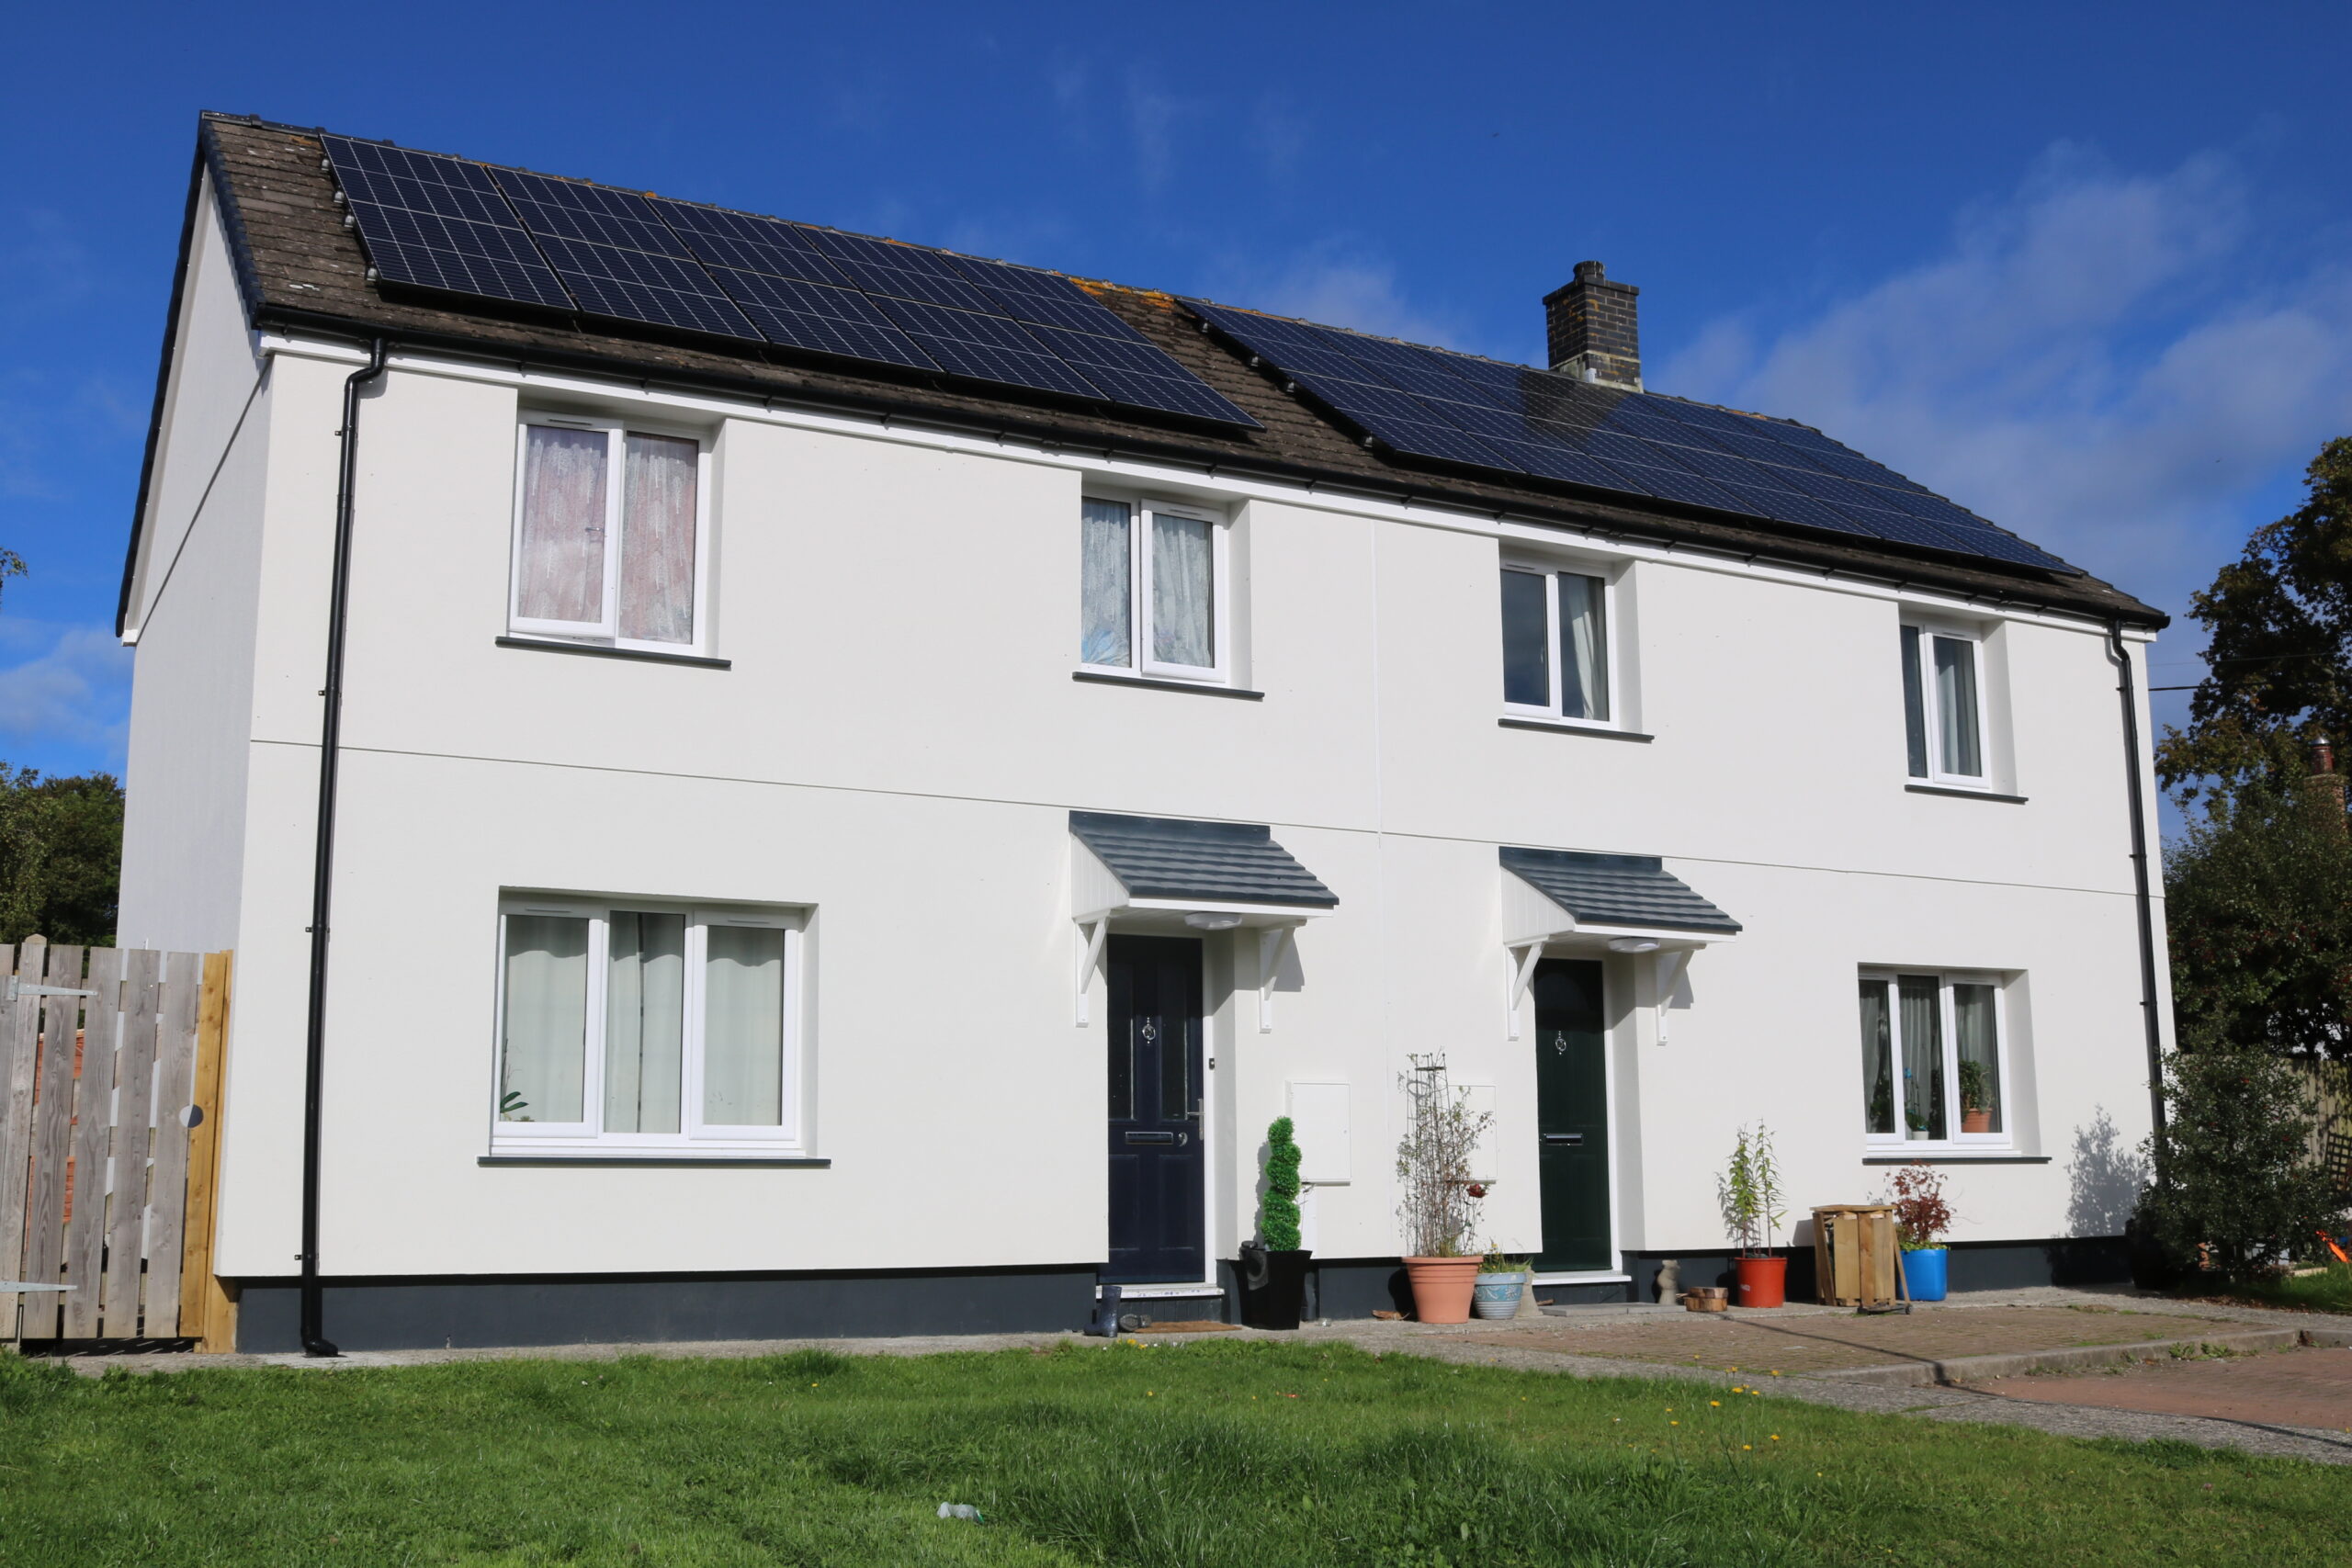 £4.6 million for GW4 Alliance-led project to retrofit UK homes based on designs to push beyond Net Zero